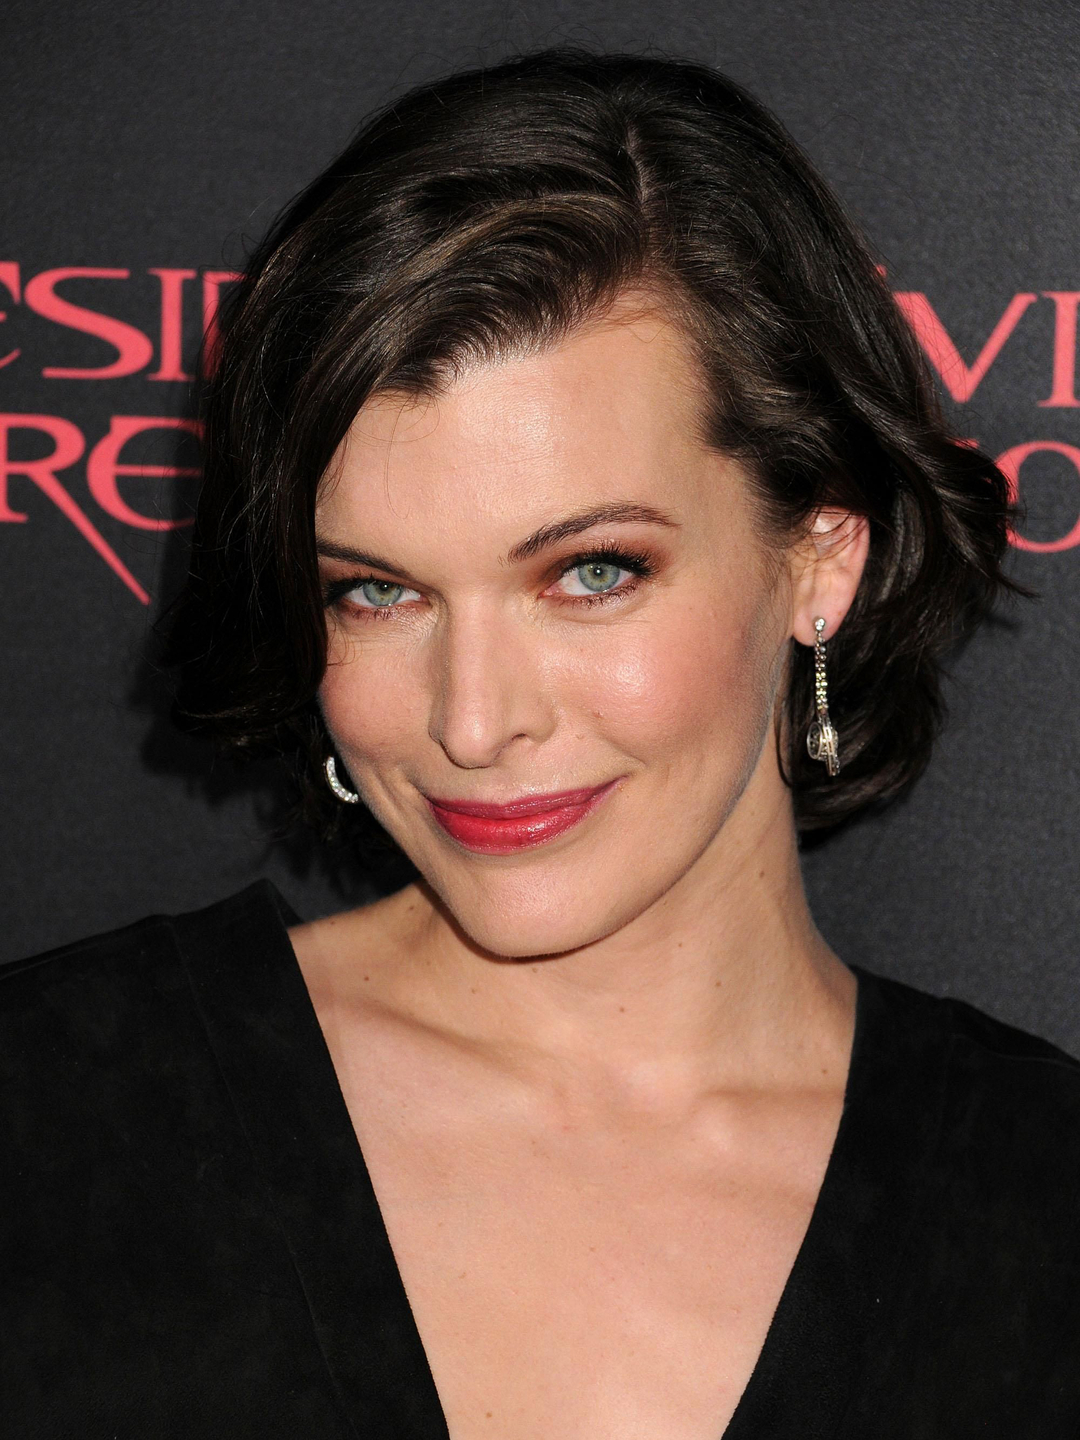 Milla Jovovich does she have kids